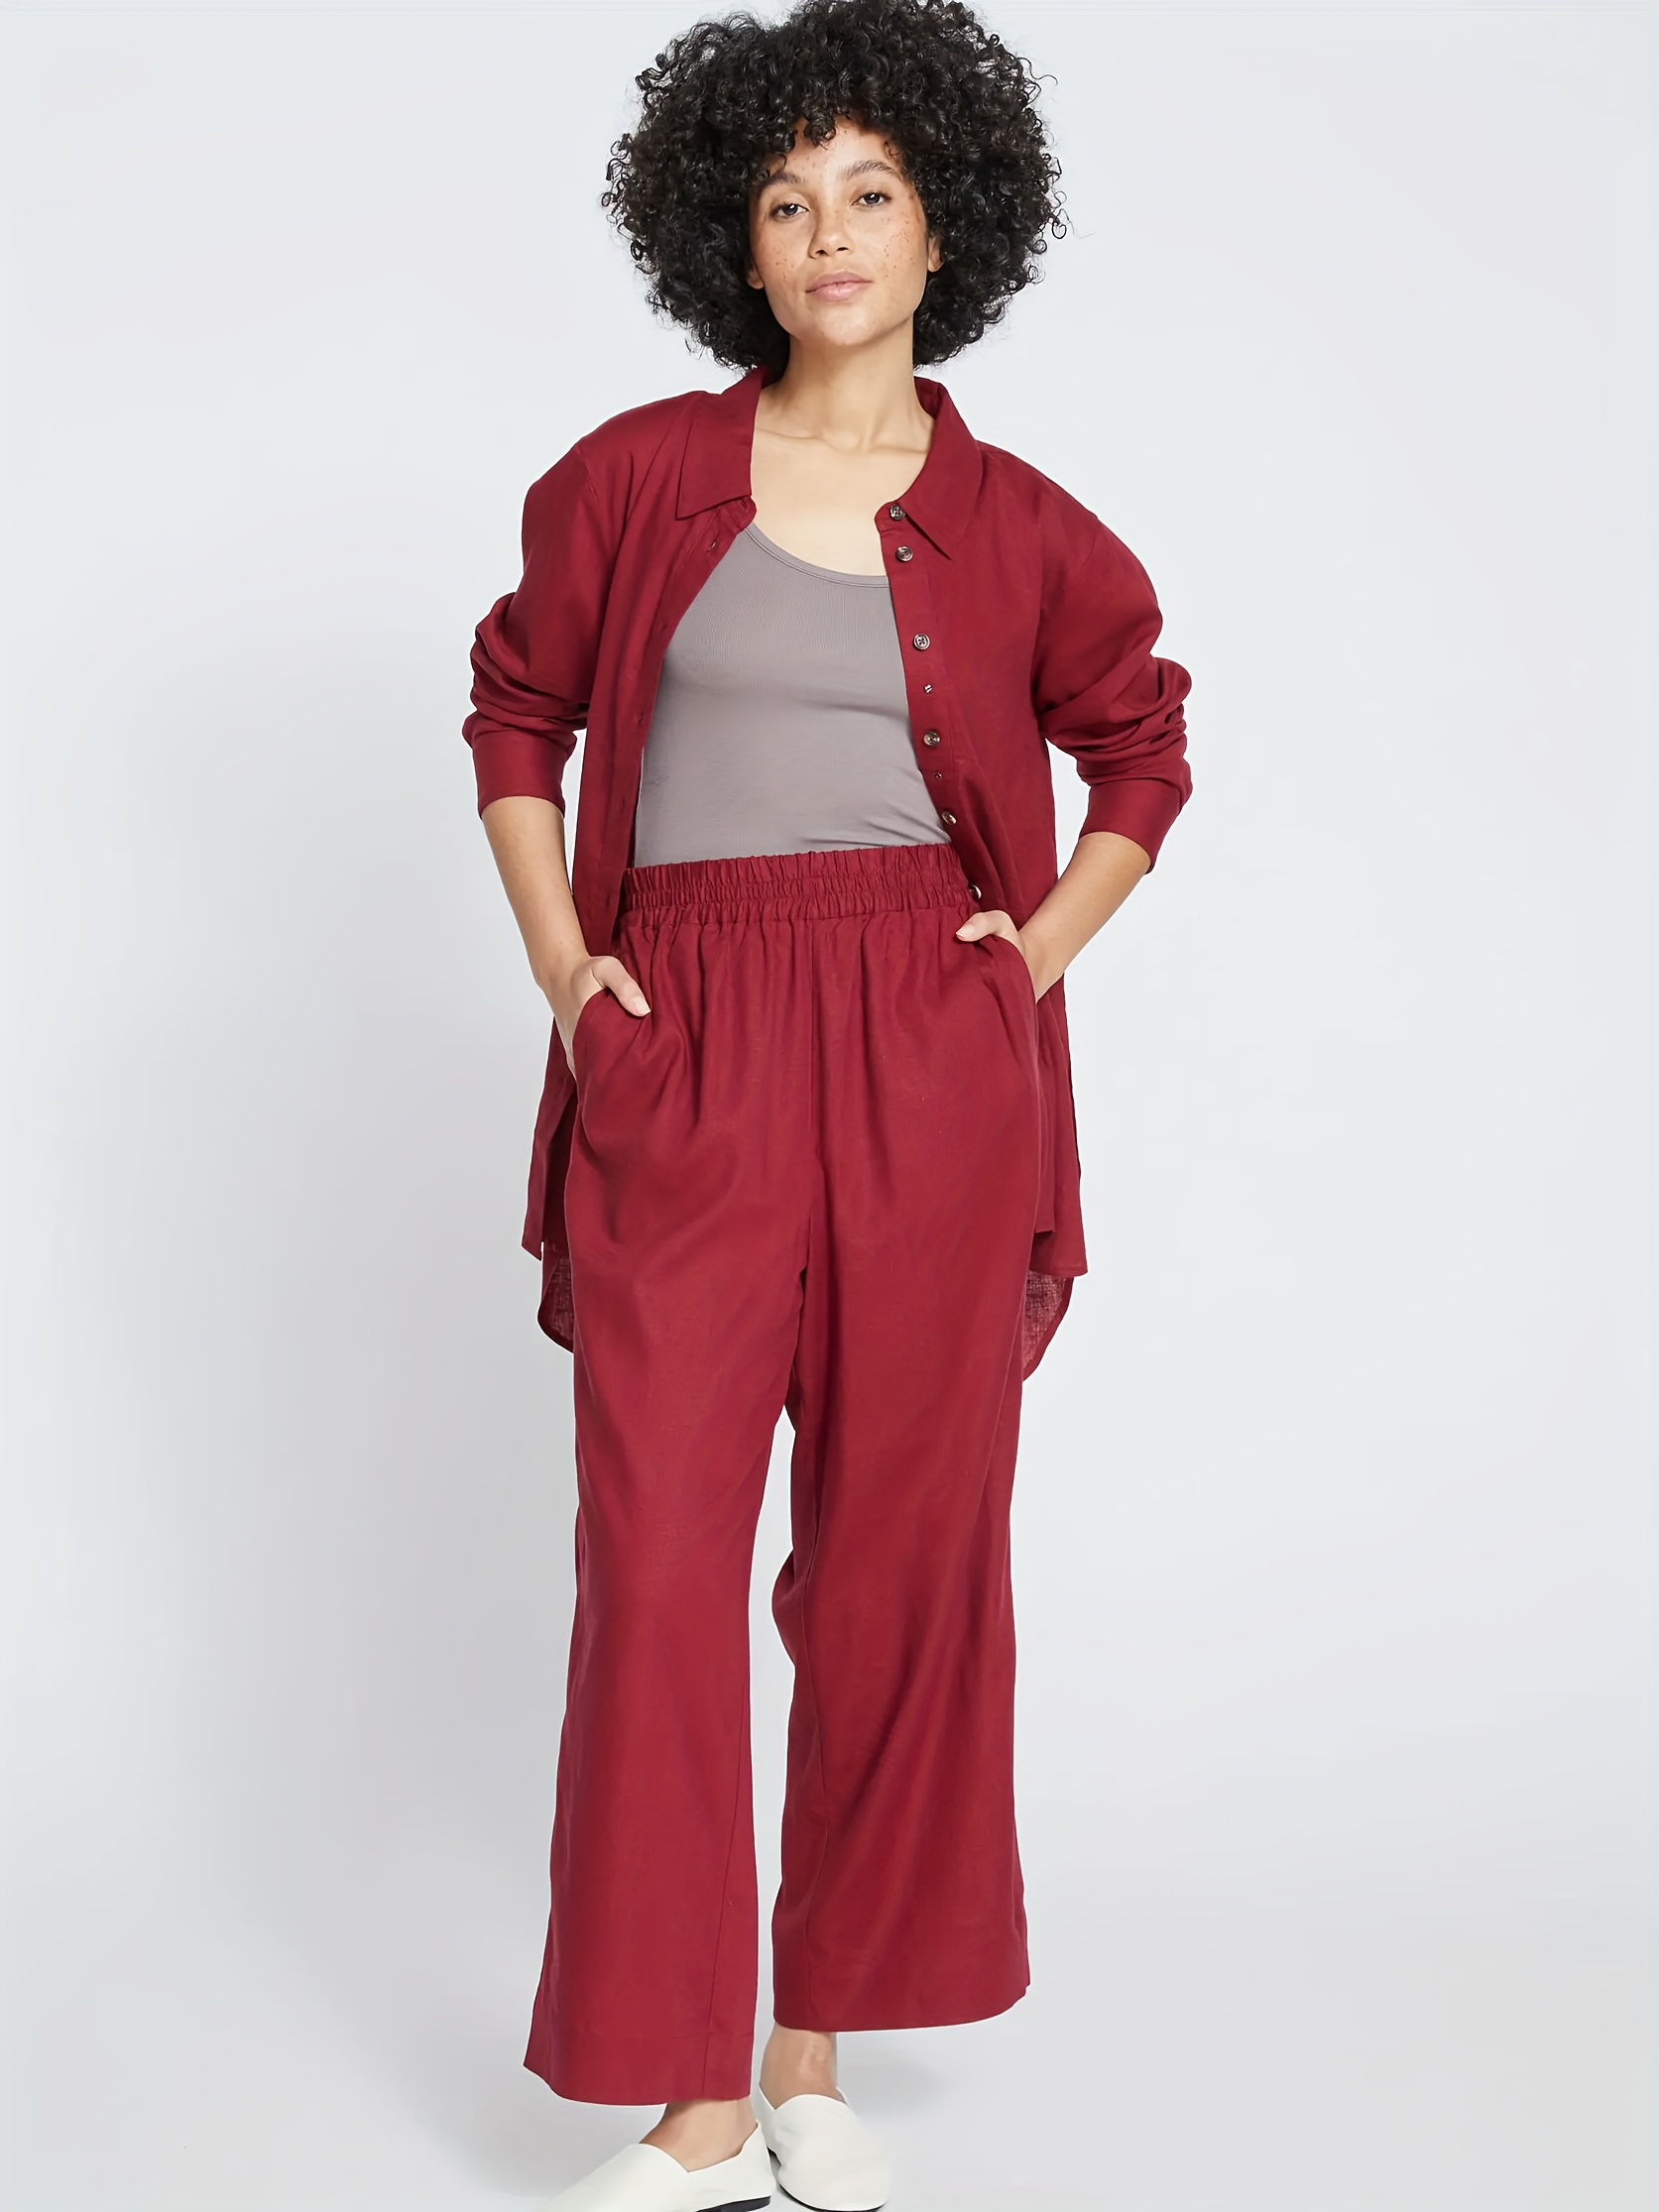 Plus Size High Rise Stretch Pants: Elastic, Flap Pocket, Casual Style For  Women From Yoqlob, $13.24